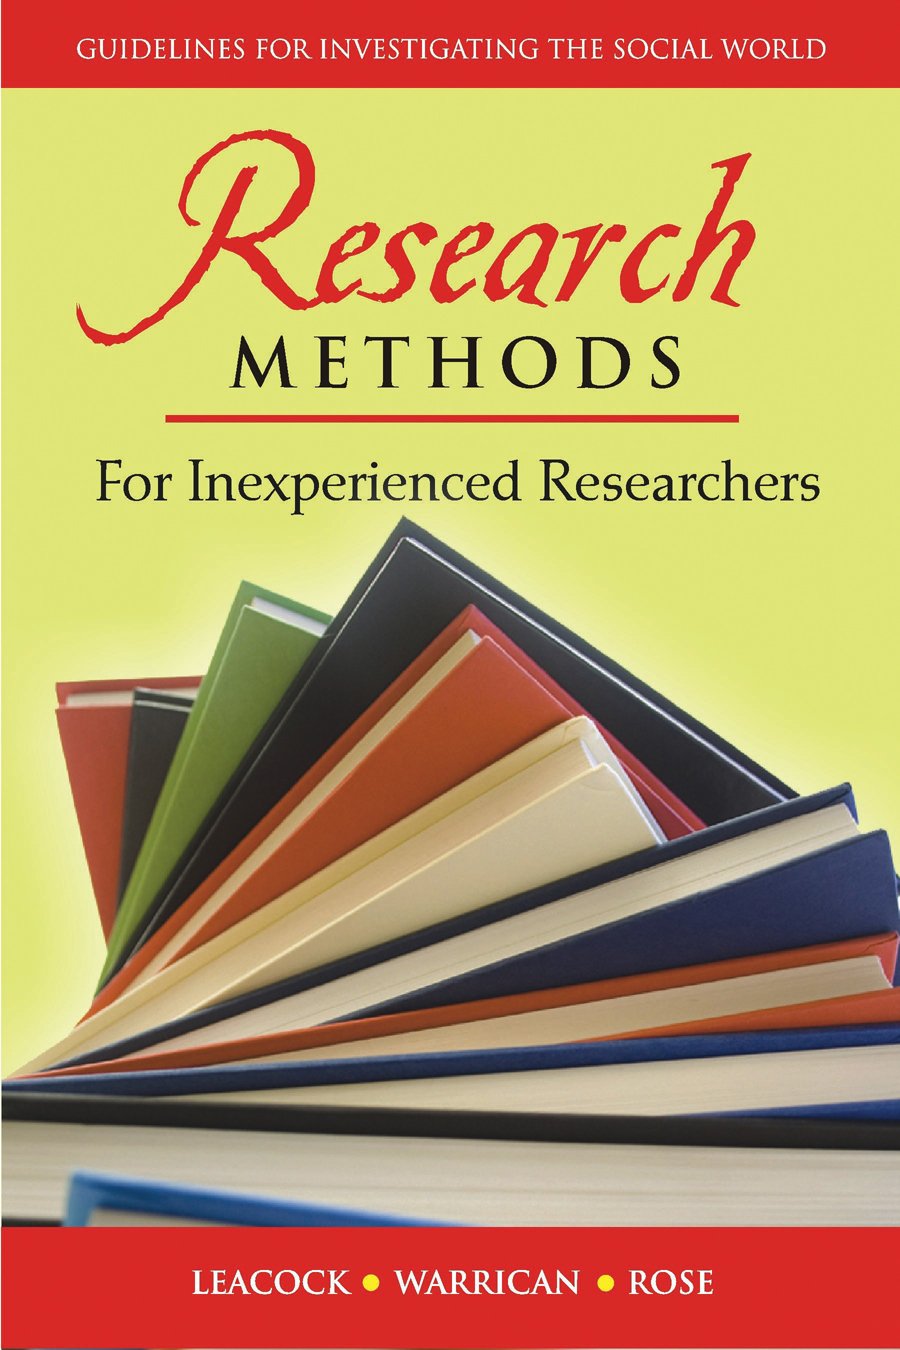 RESEARCH METHODS FOR INEXPERIENCED RESEARCHERS